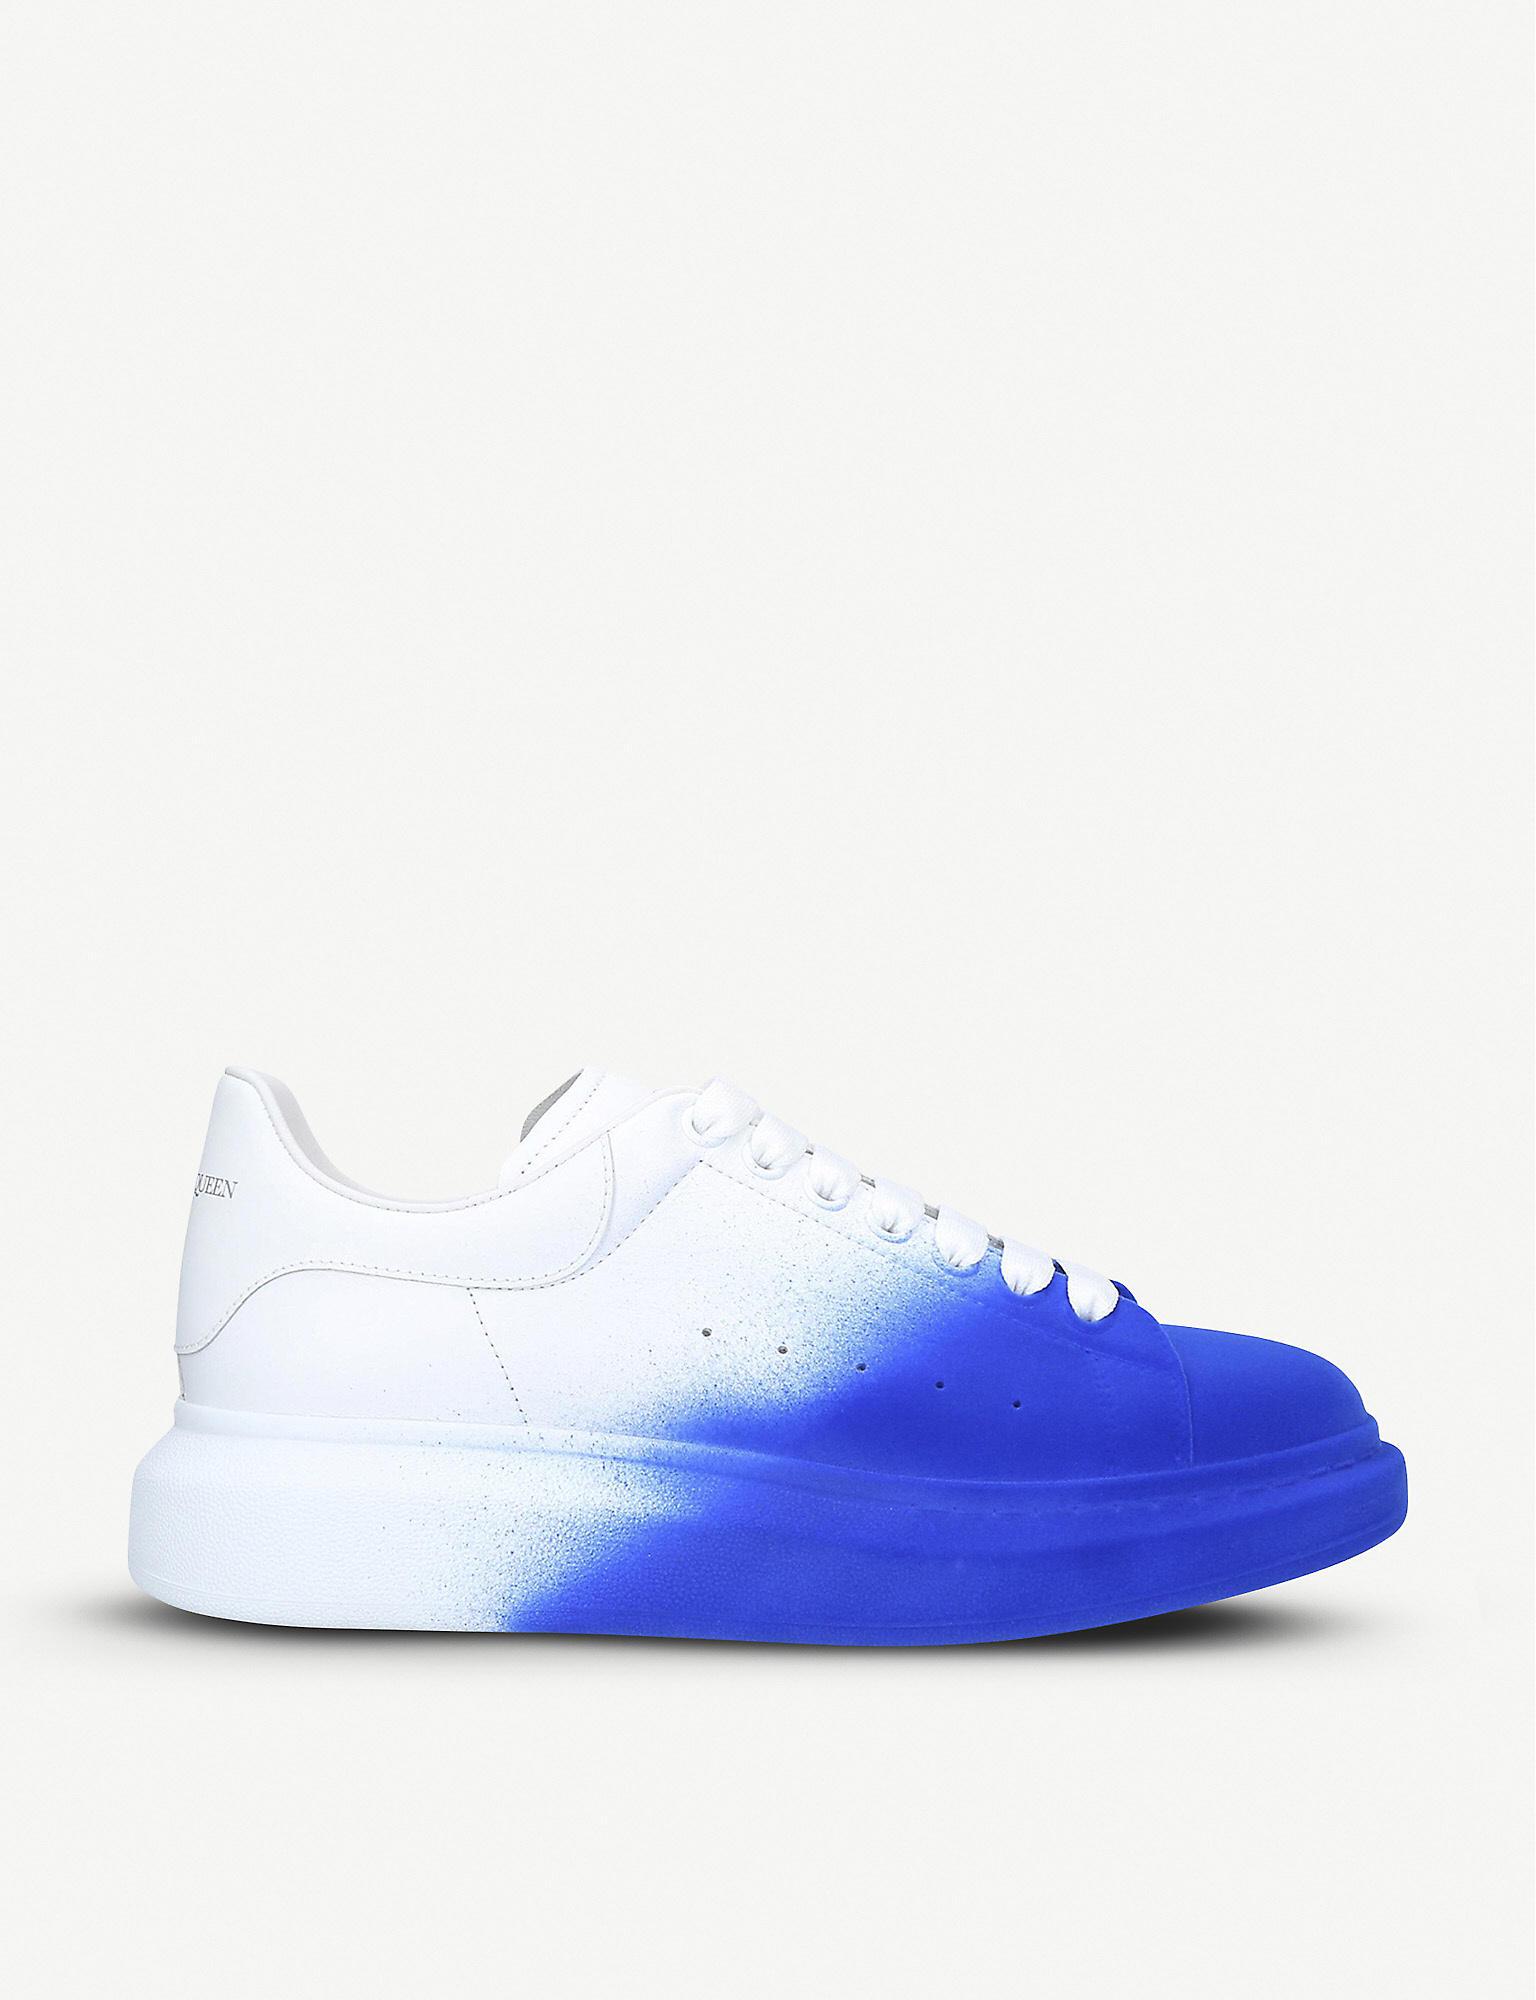 Alexander McQueen Show Leather Trainers in White/Navy (Blue) for Men - Lyst